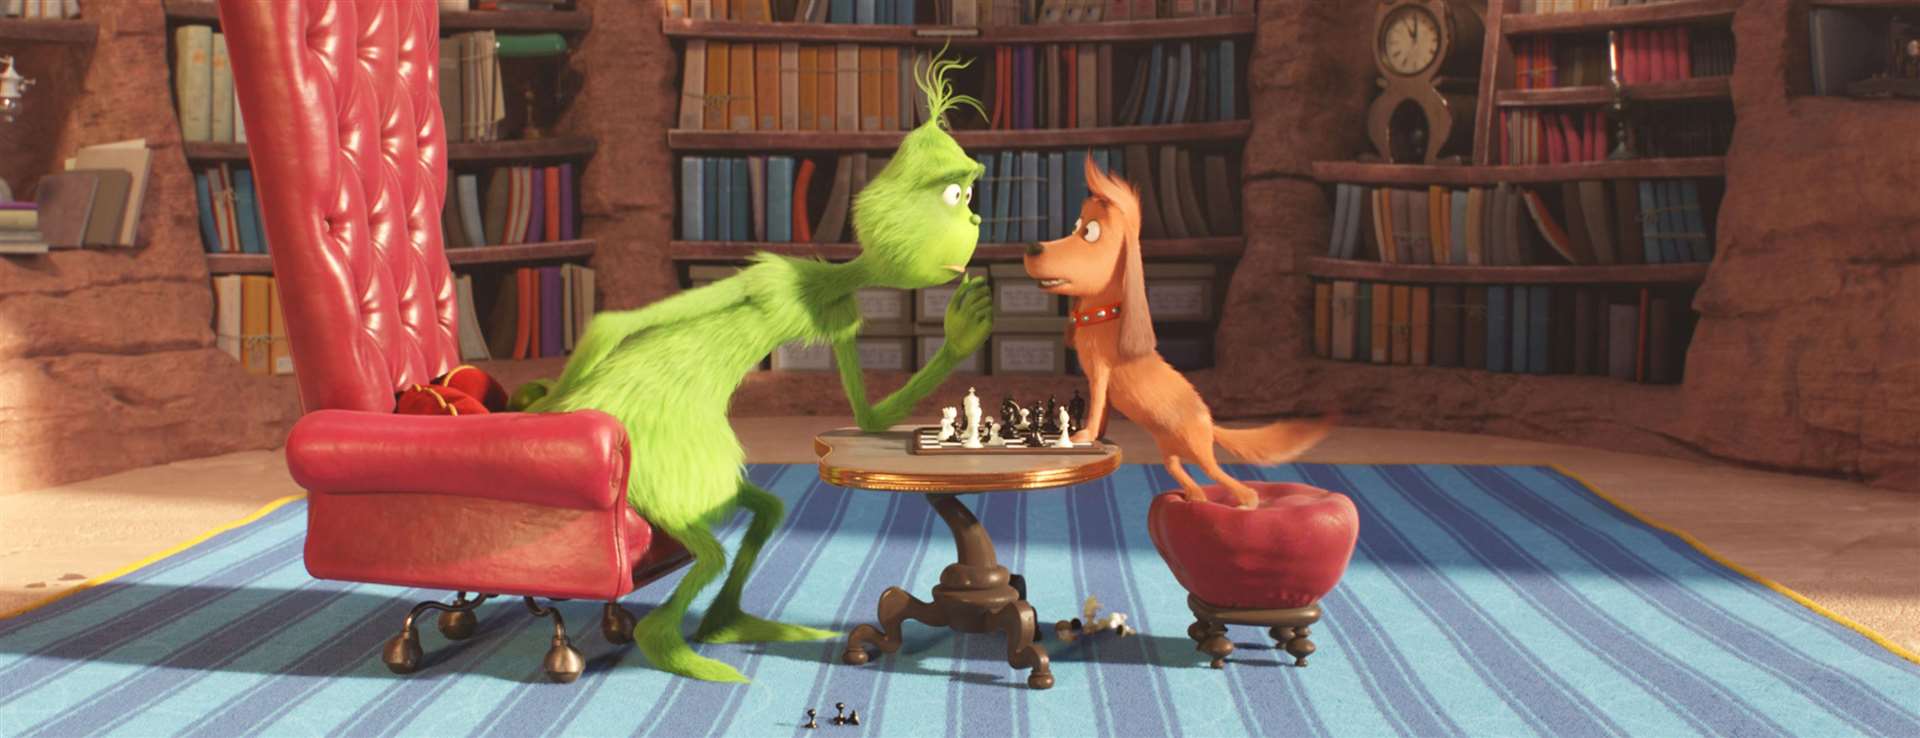 The Grinch (voiced by Benedict Cumberbatch) and trusty pooch Max play chess. Picture: PA Photo/Universal Pictures/Illumination/Dr Seuss Enterprises.